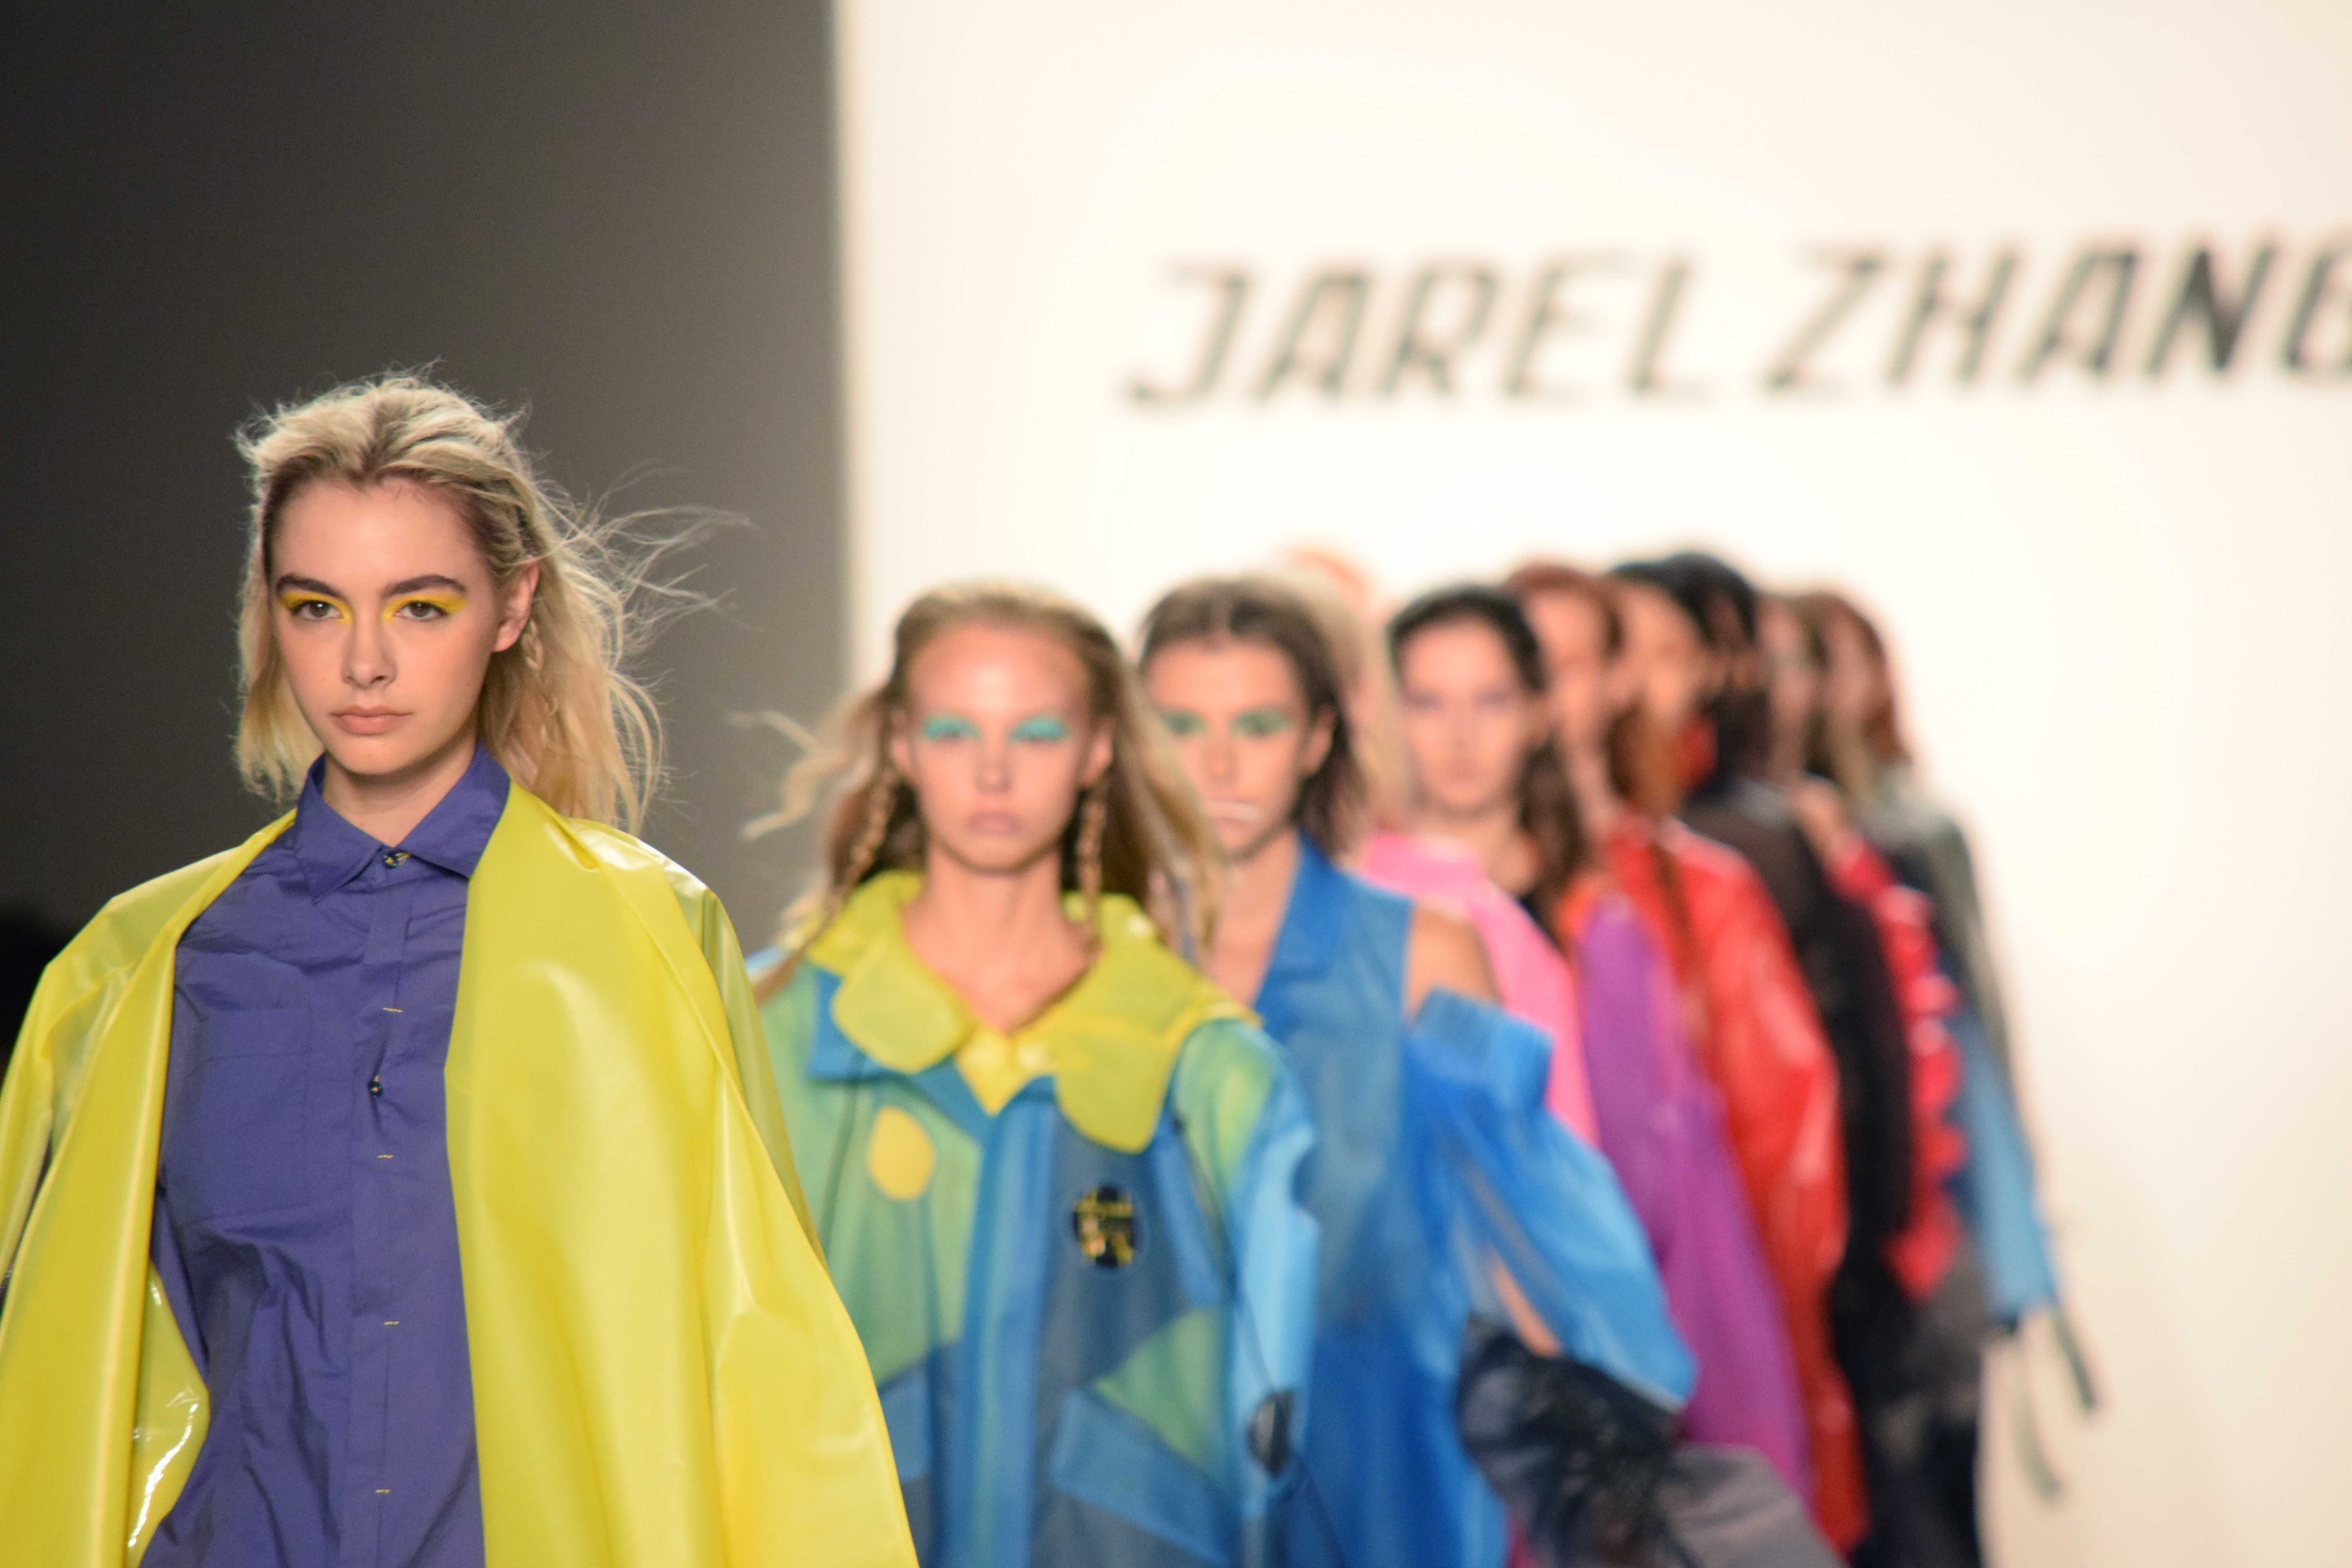 Finale at the Jarel Zhang fashion show at the Skylight at Clarkson Square on Sept. 10 in NYC. (ANDRONIKA ZIMMERMAN/ THE OBSERVER)